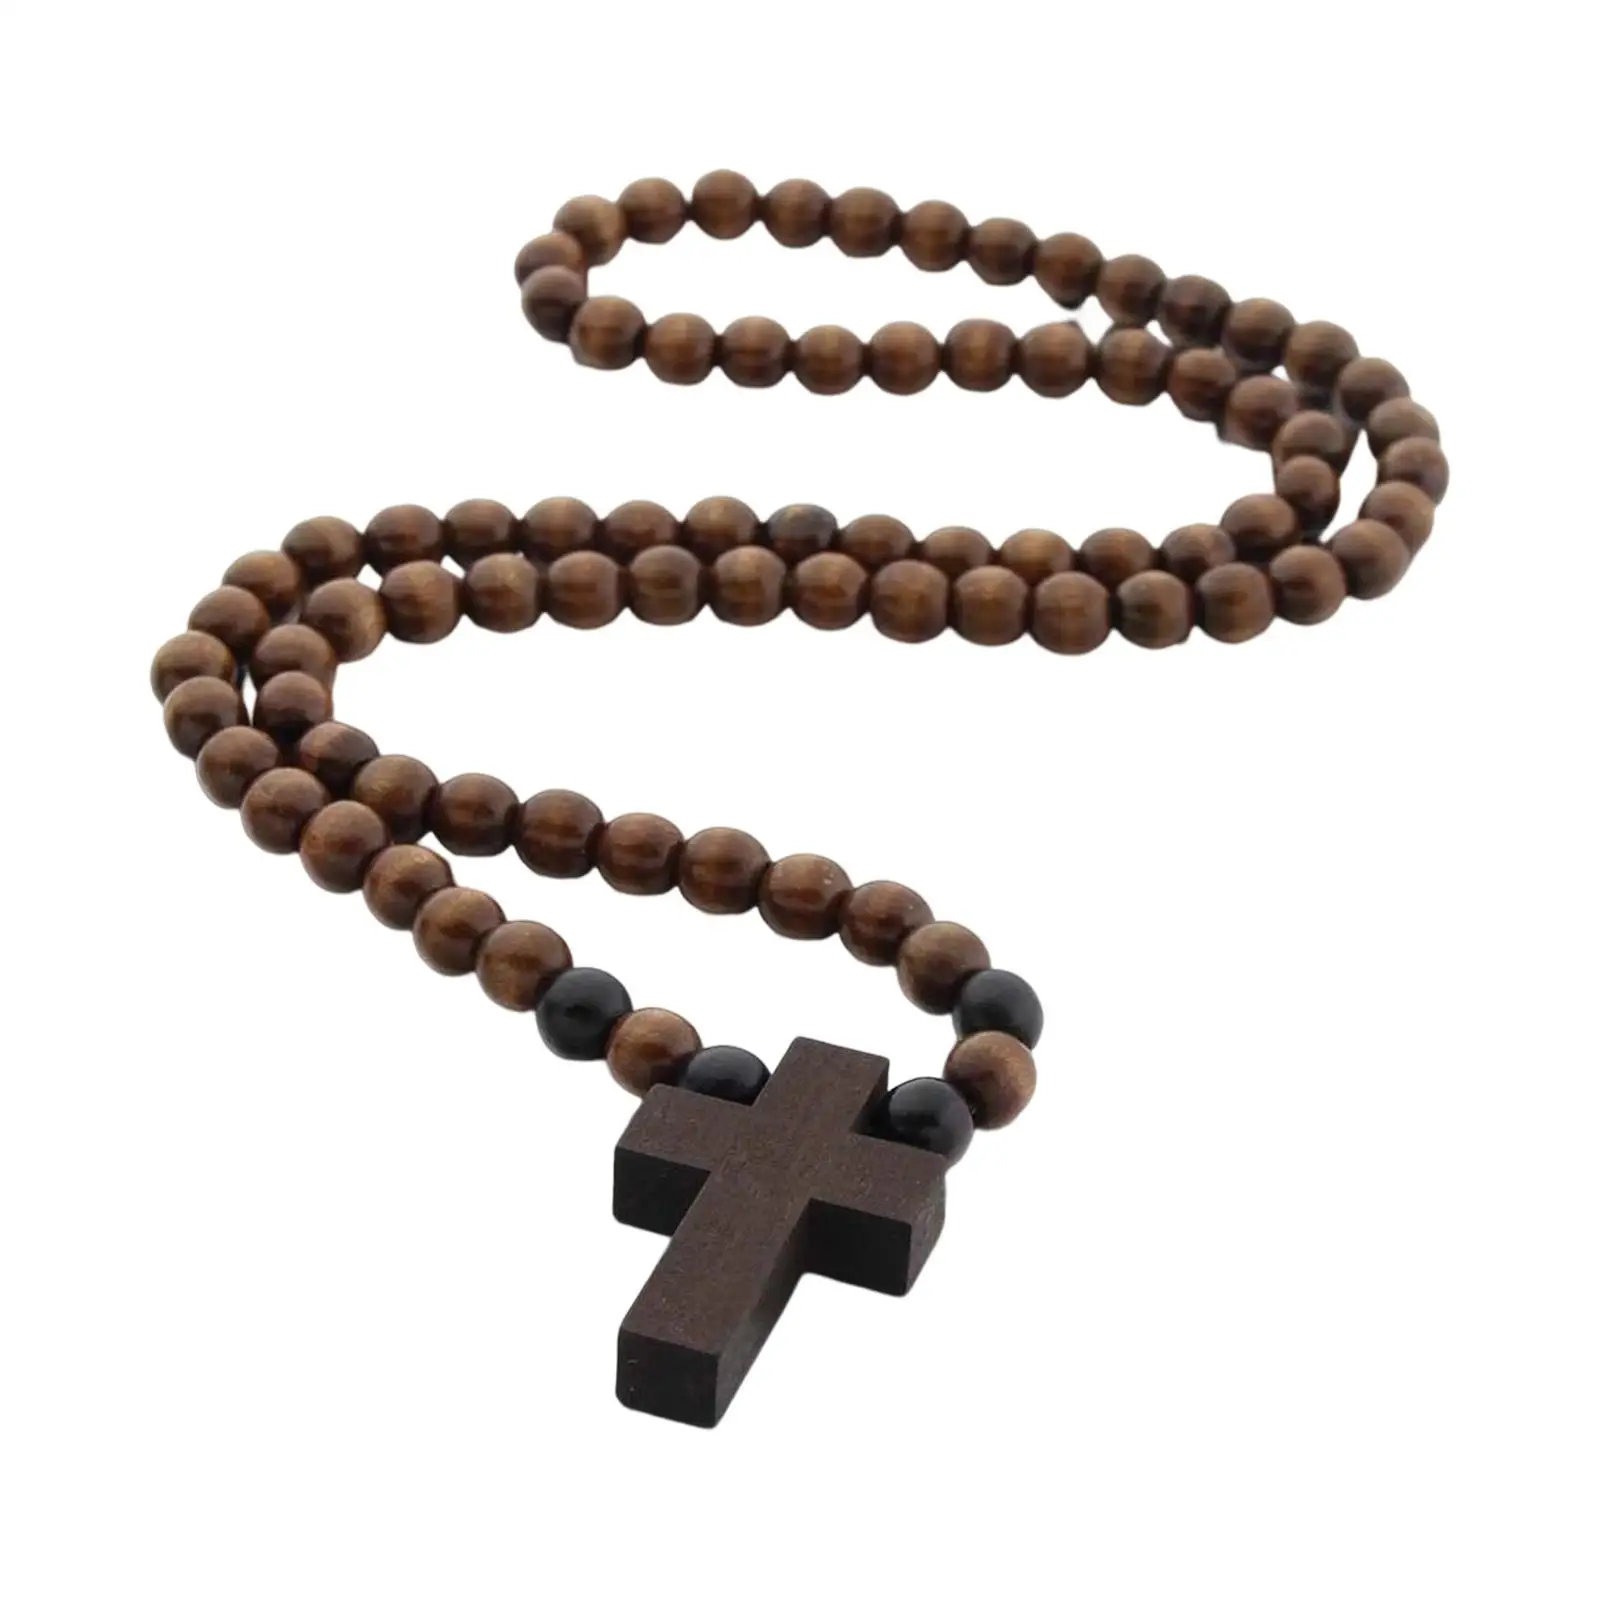 Wooden Beaded Necklace Chain fashion Boys Girls Teens Charms Clothing Accessories Cross Pendant Necklace for Anniversary